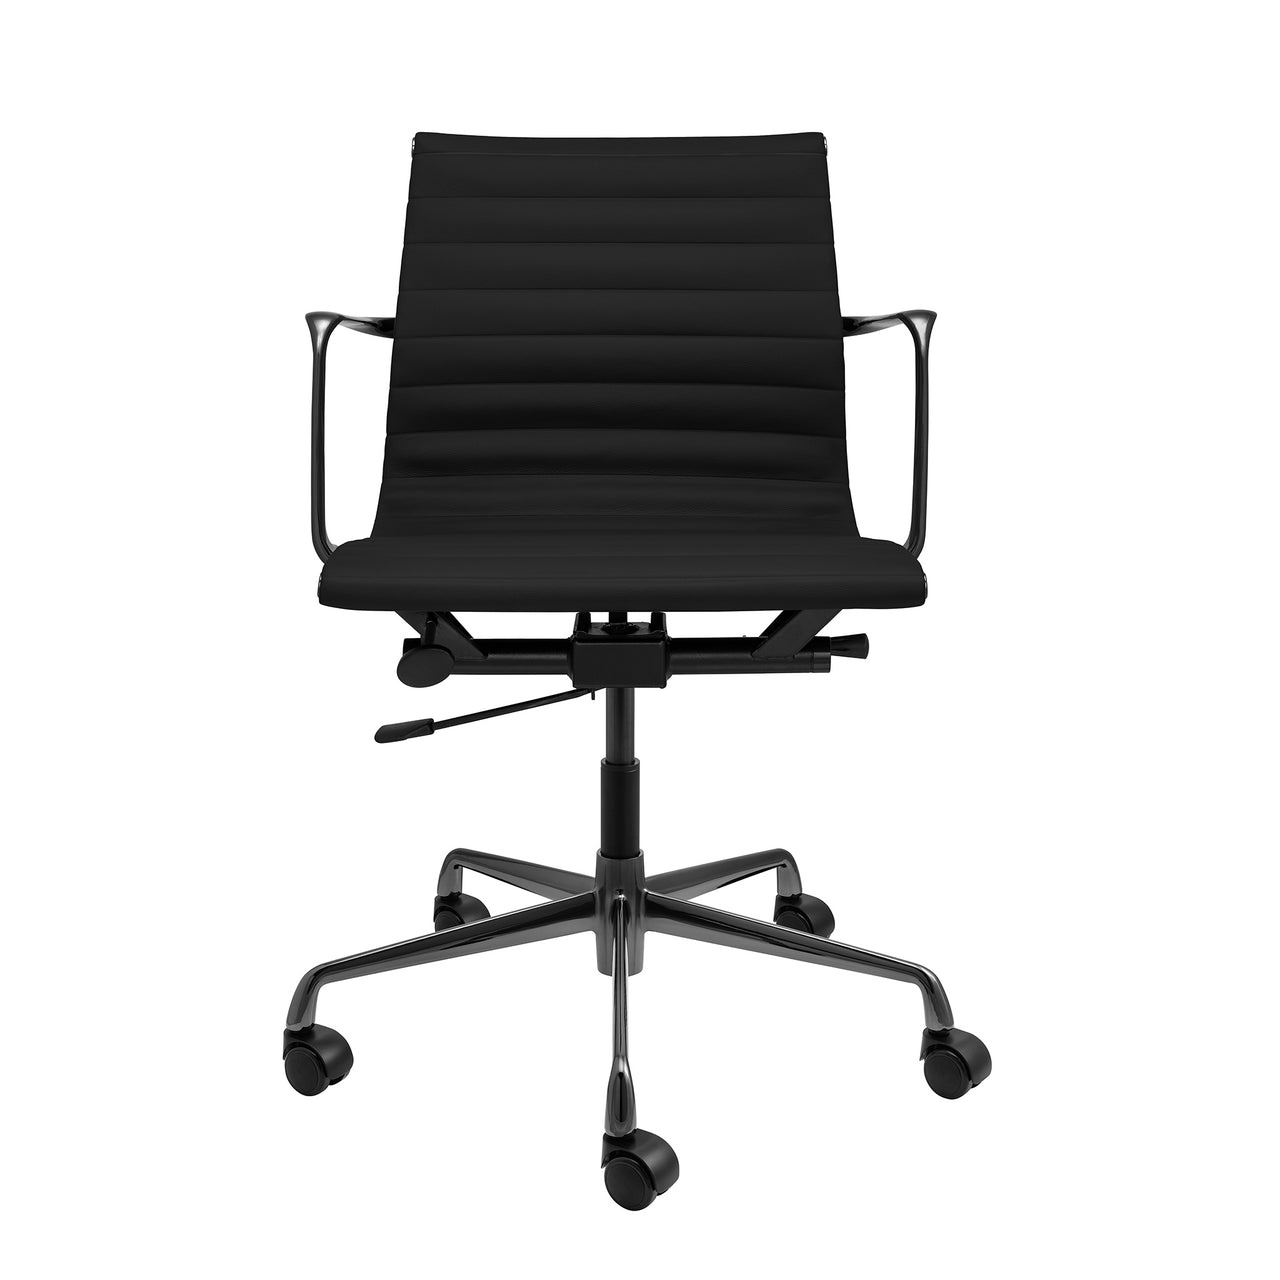 Pro Ribbed Management Chair (Black/Gunmetal Limited Edition)